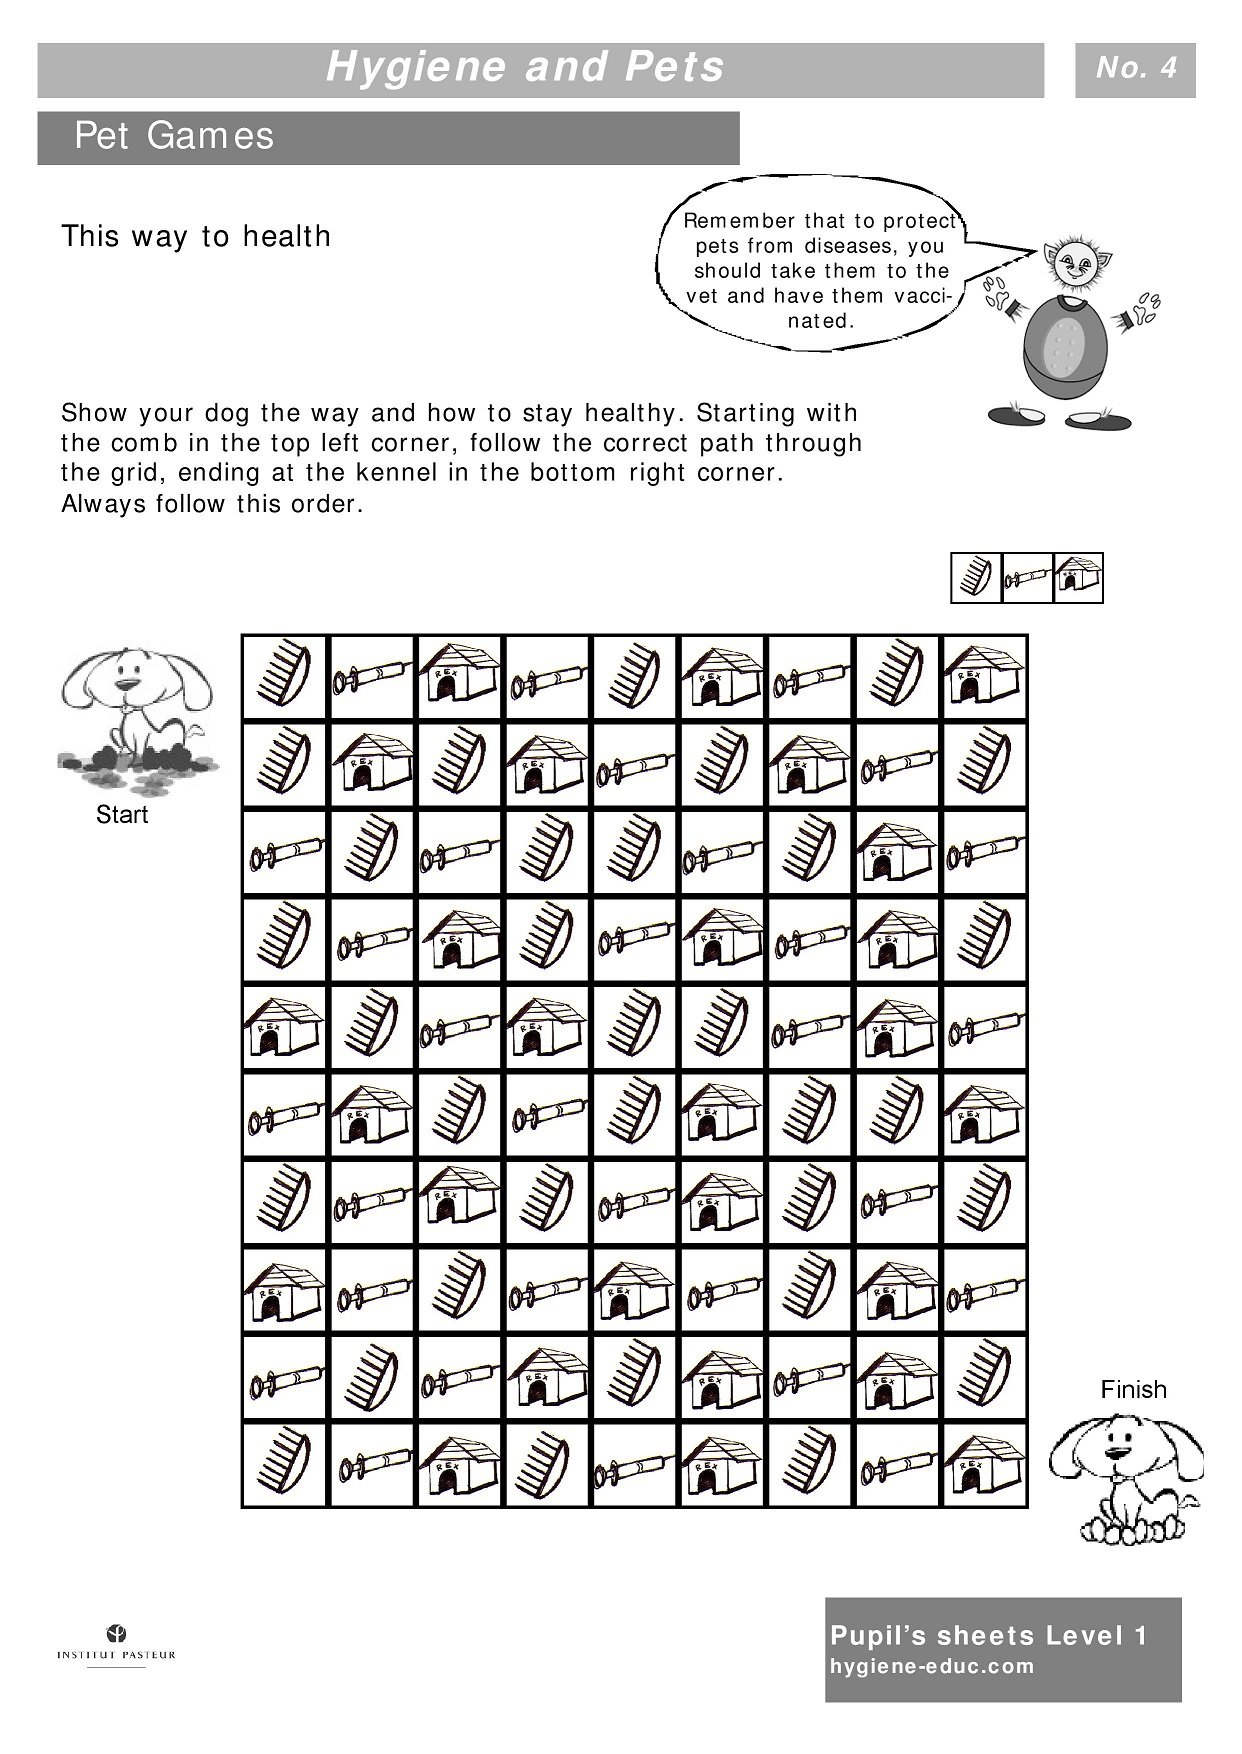 Hygiene And Pets Worksheets For Kids Level 1  Personal Hygiene Or Sleep Hygiene Worksheet